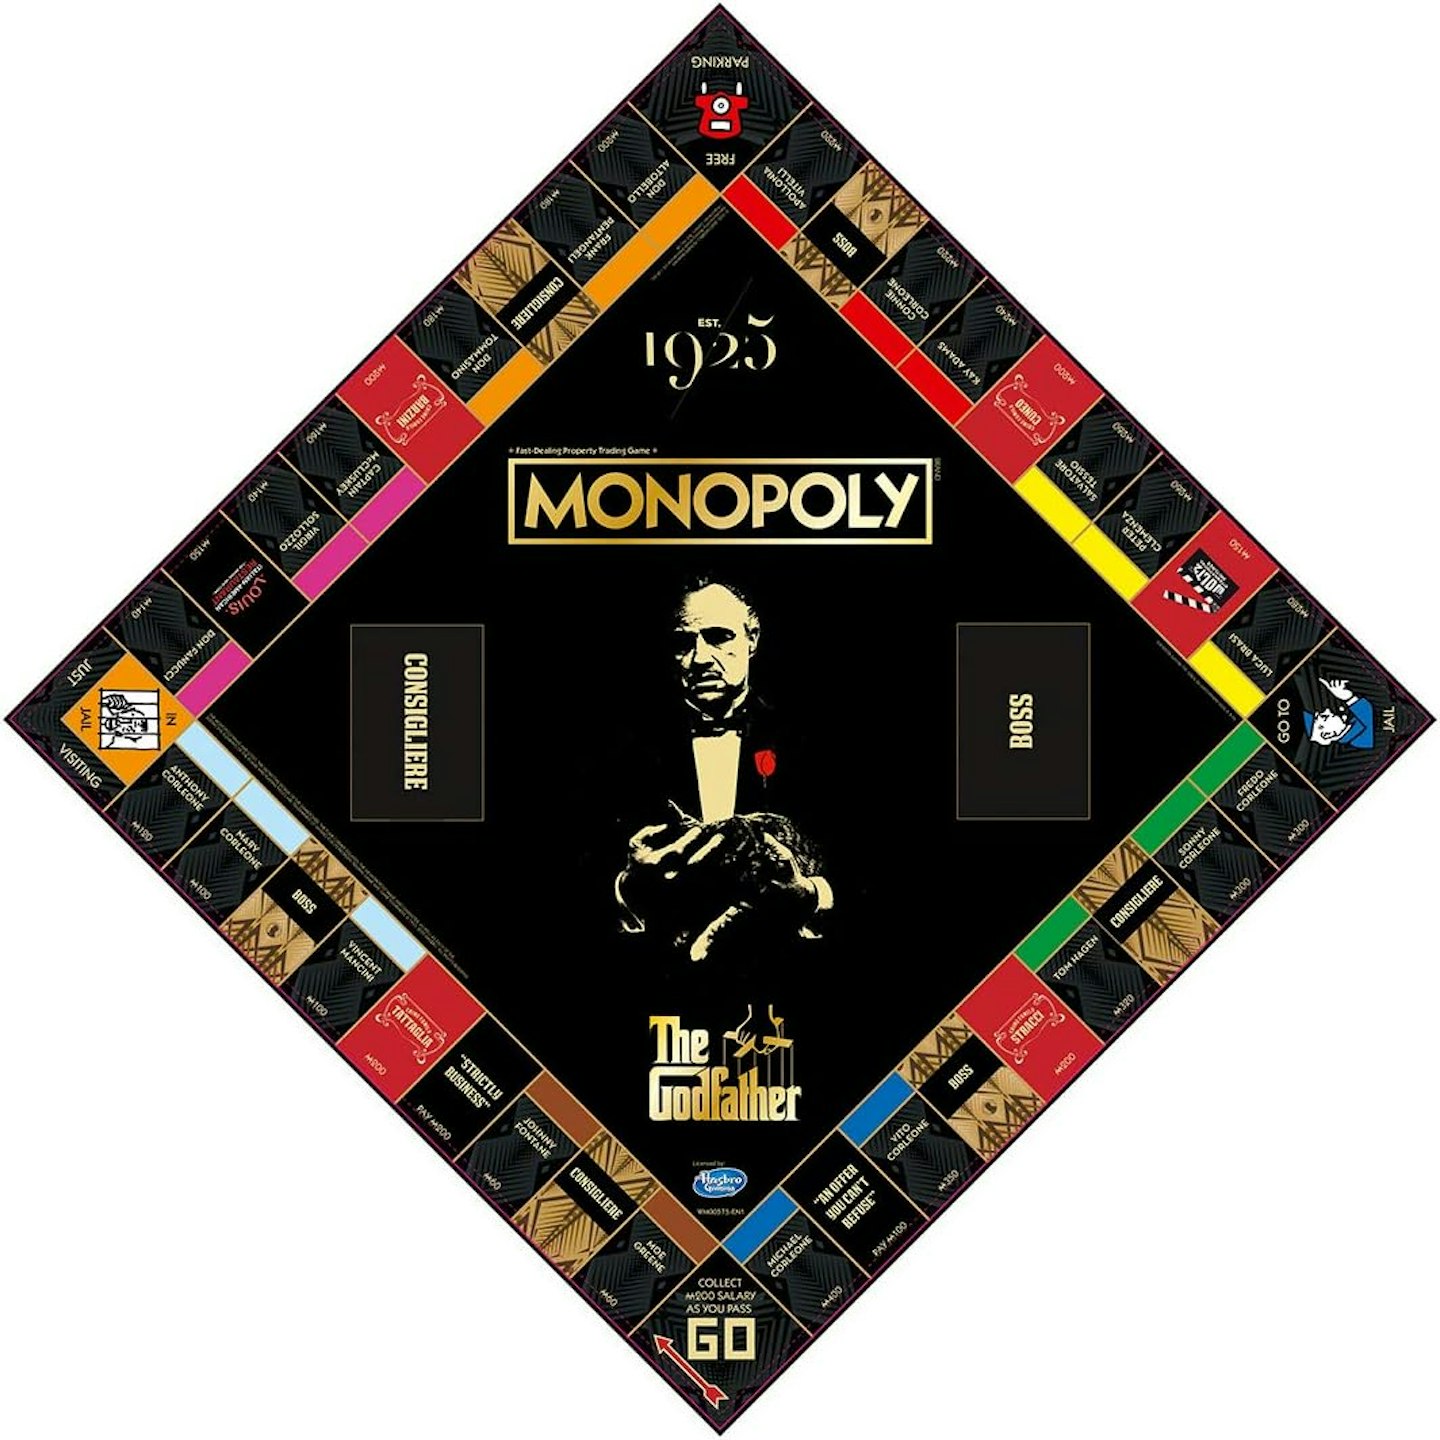 The Godfather edition of Monopoly board game